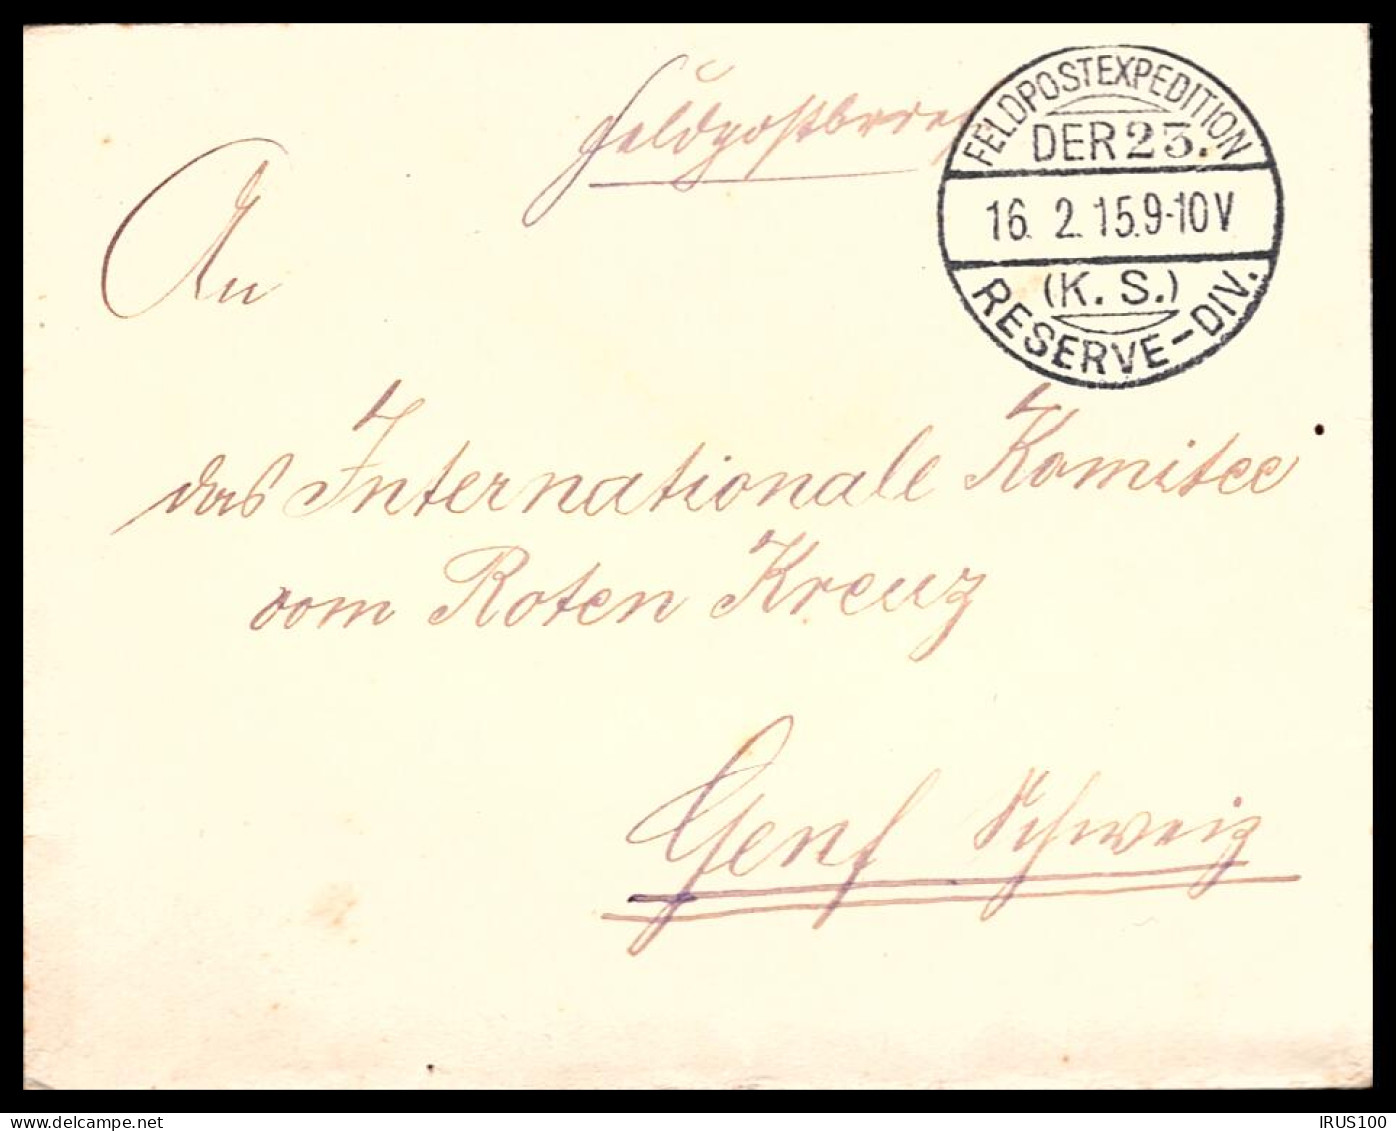 FELDPOSTEXPEDITION - 1915 - (K.S.) RESERVE-DIV -  - Lettres & Documents